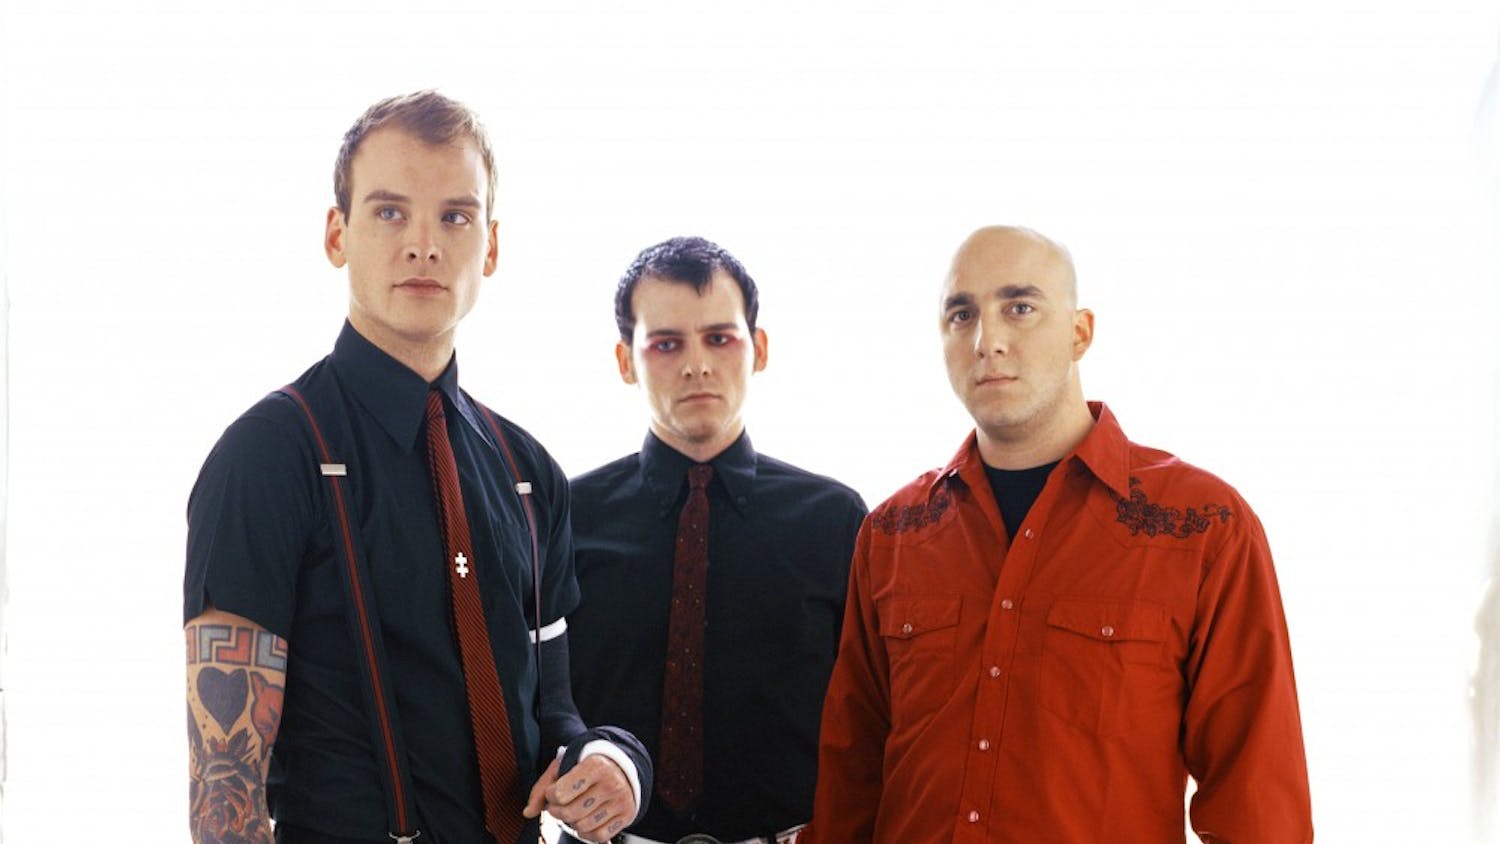 Alkaline Trio both evolves and degrades in Agony & Irony.